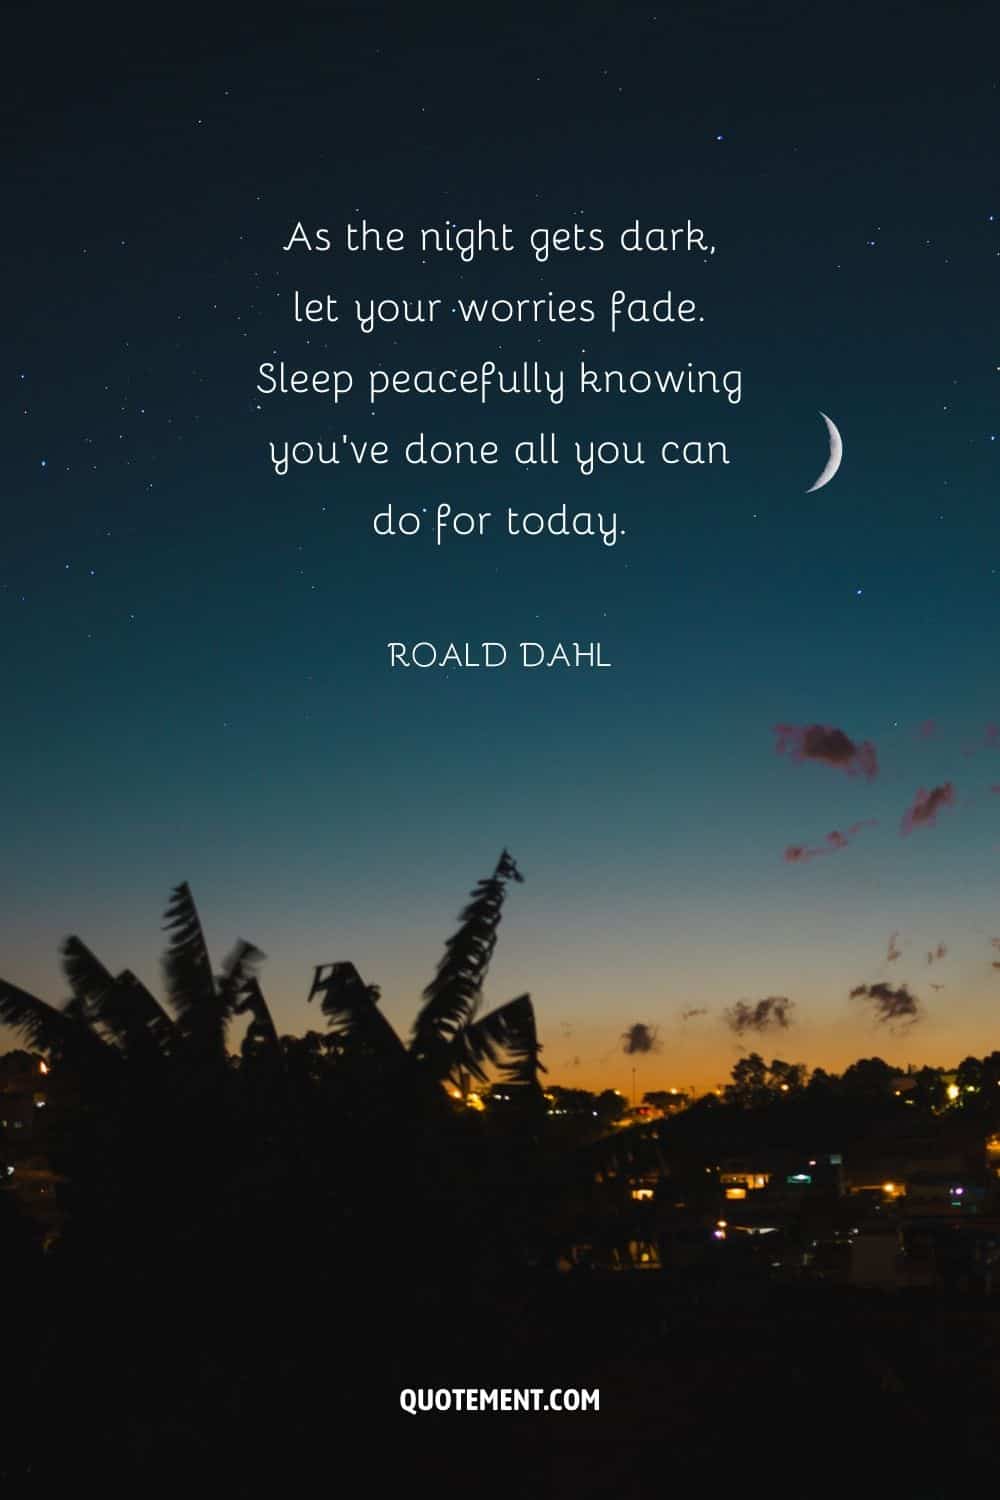 As the night gets dark, let your worries fade